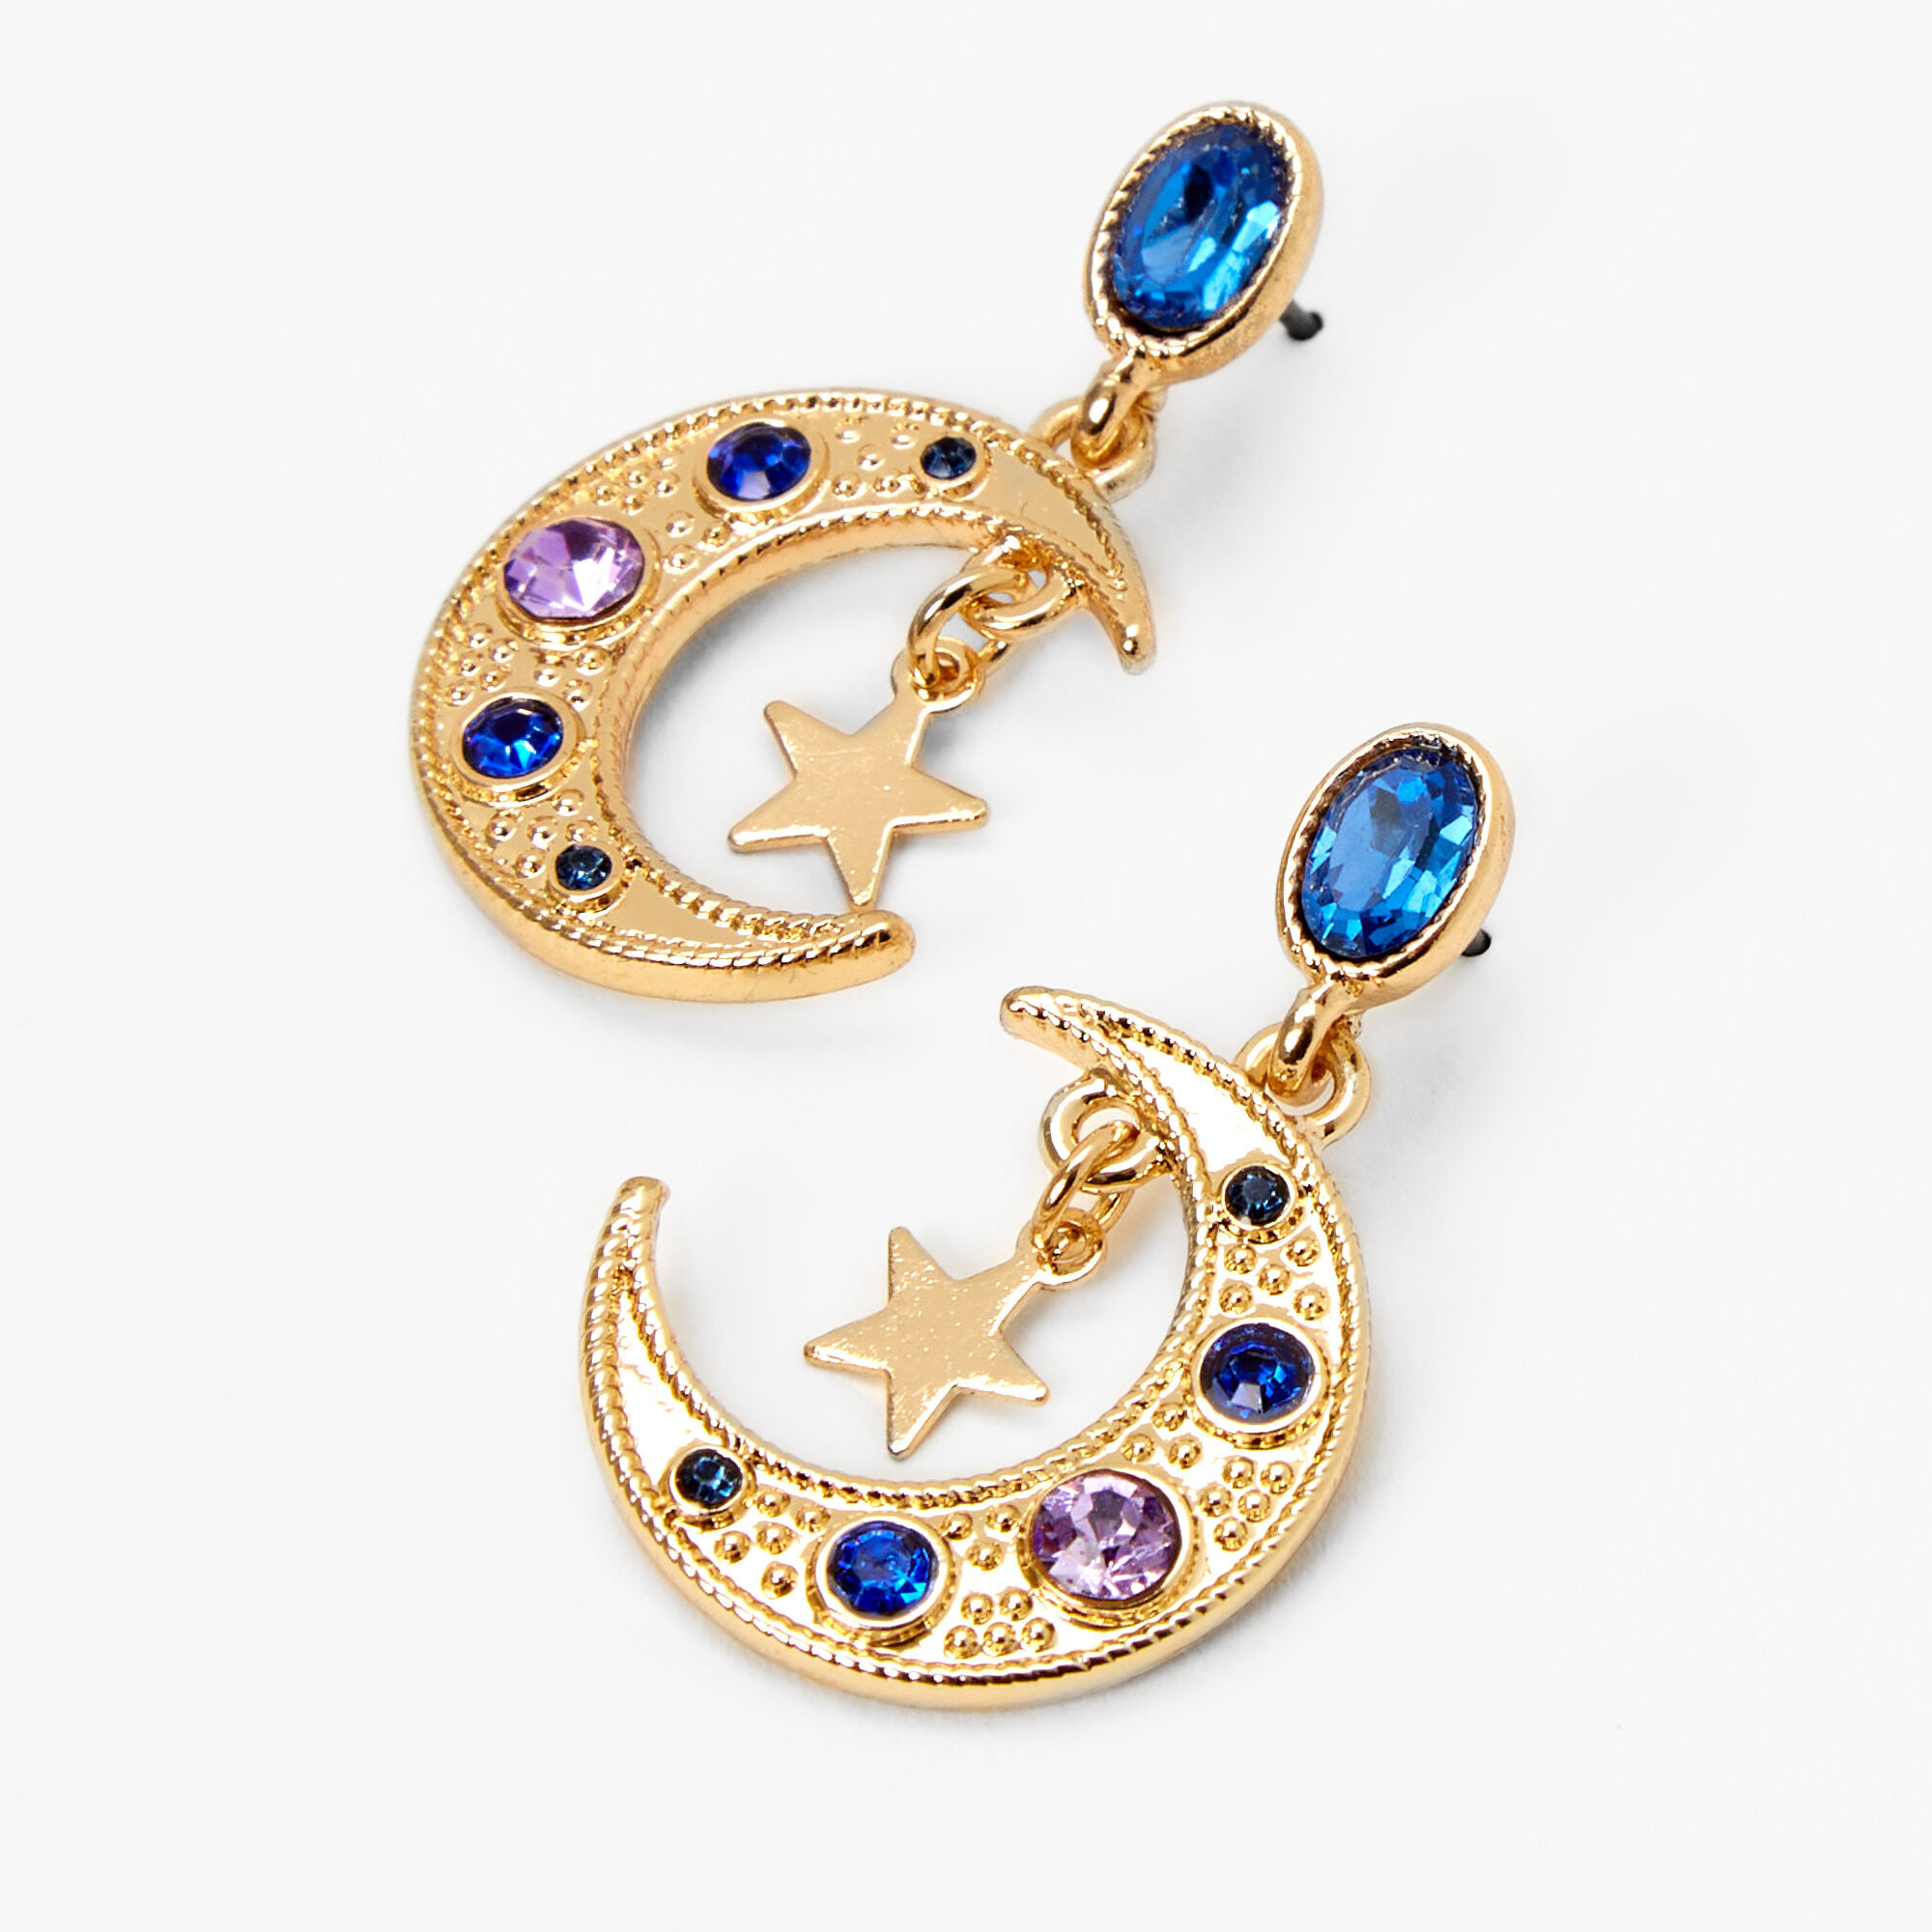 Large Crescent Moon Charm With 7 Diamonds – Helen Ficalora